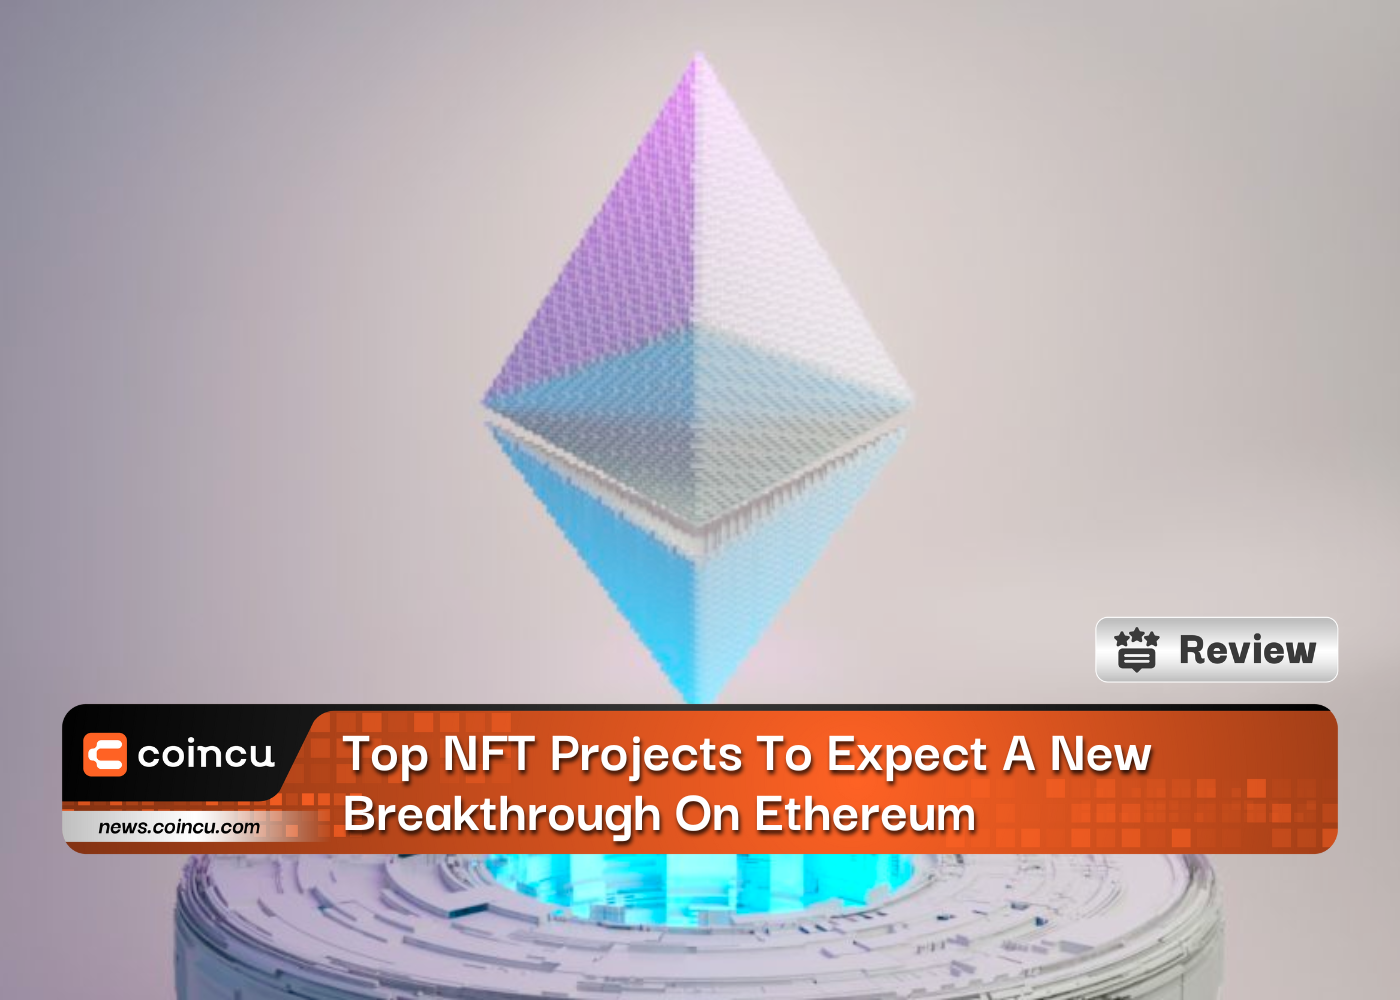 Top NFT Projects To Expect A New Breakthrough On Ethereum